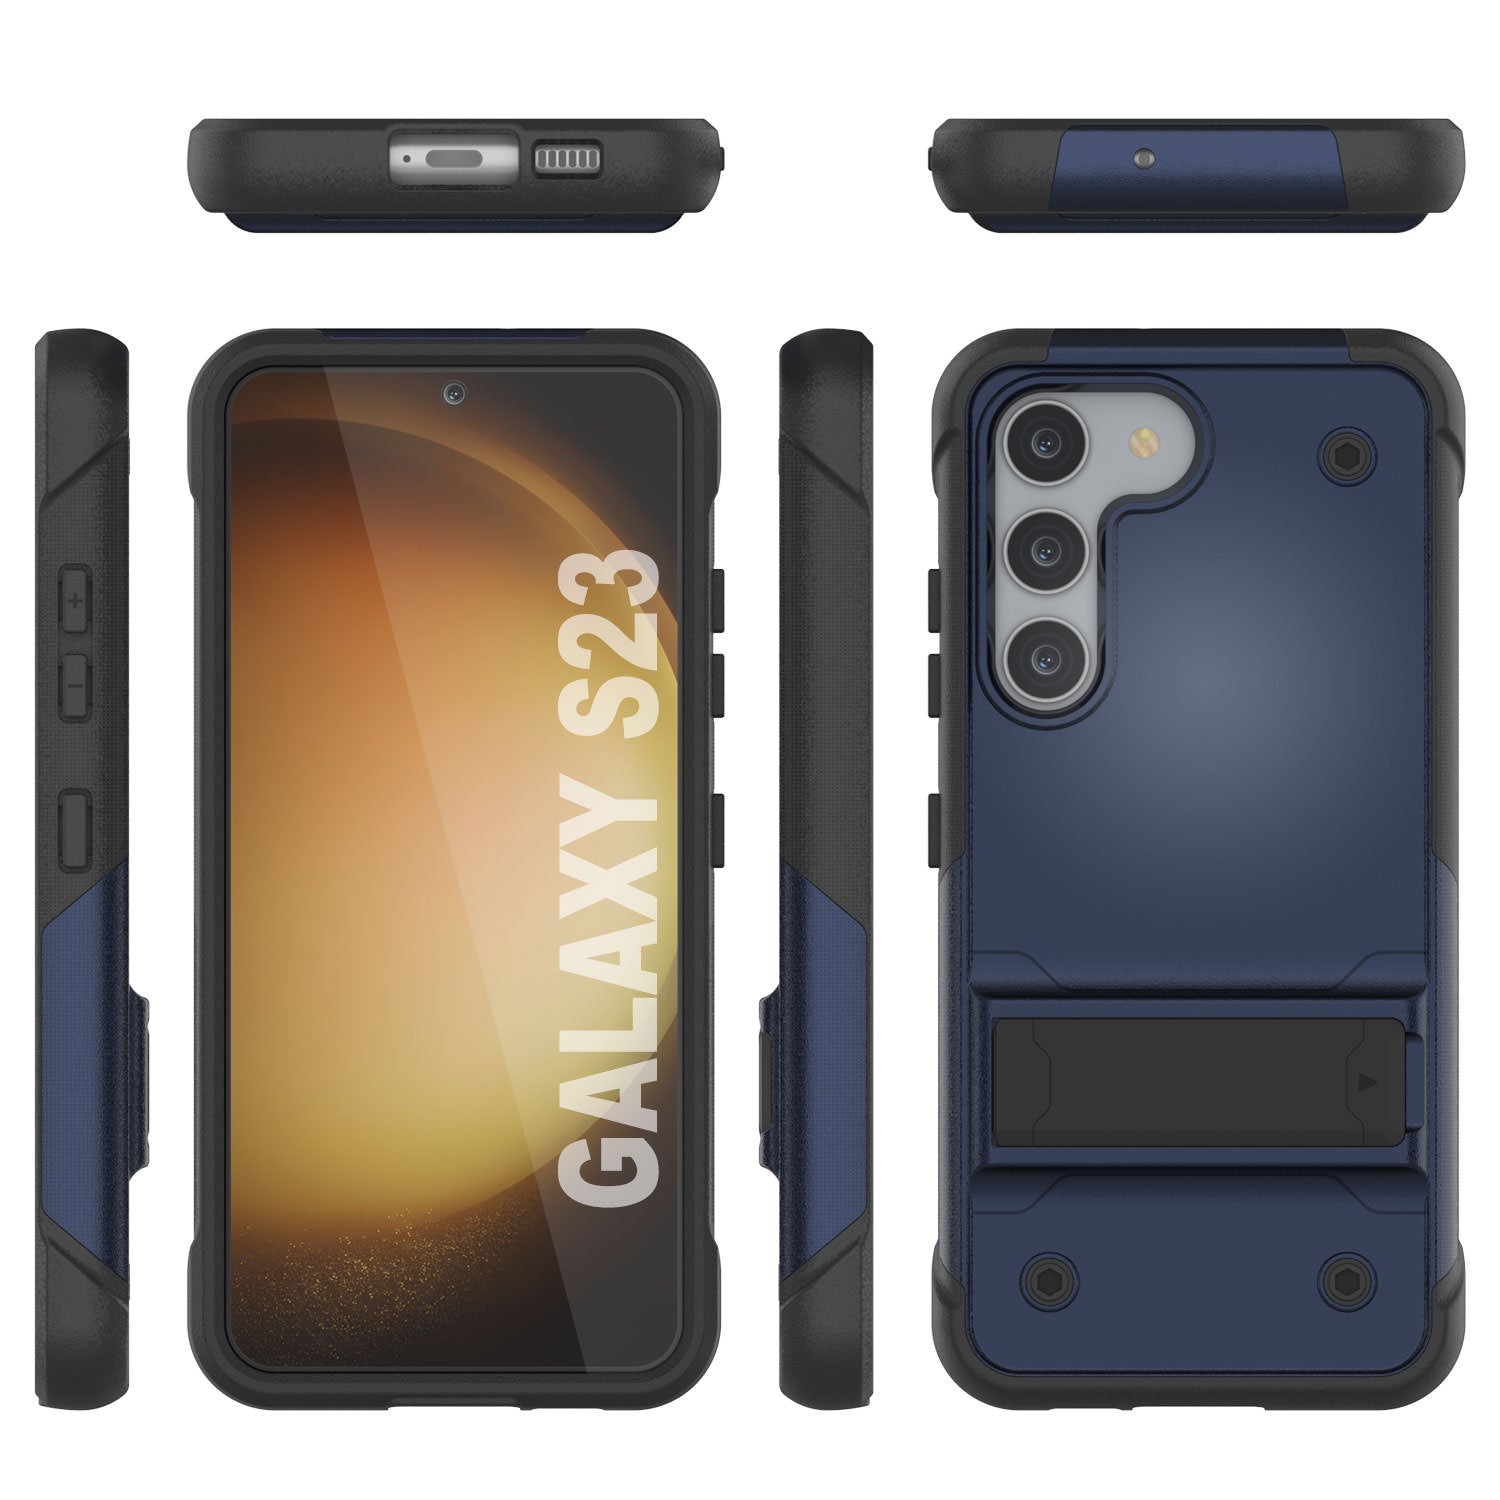 Punkcase Galaxy S24 Case [Reliance Series] Protective Hybrid Military Grade Cover W/Built-in Kickstand [Navy-Black]